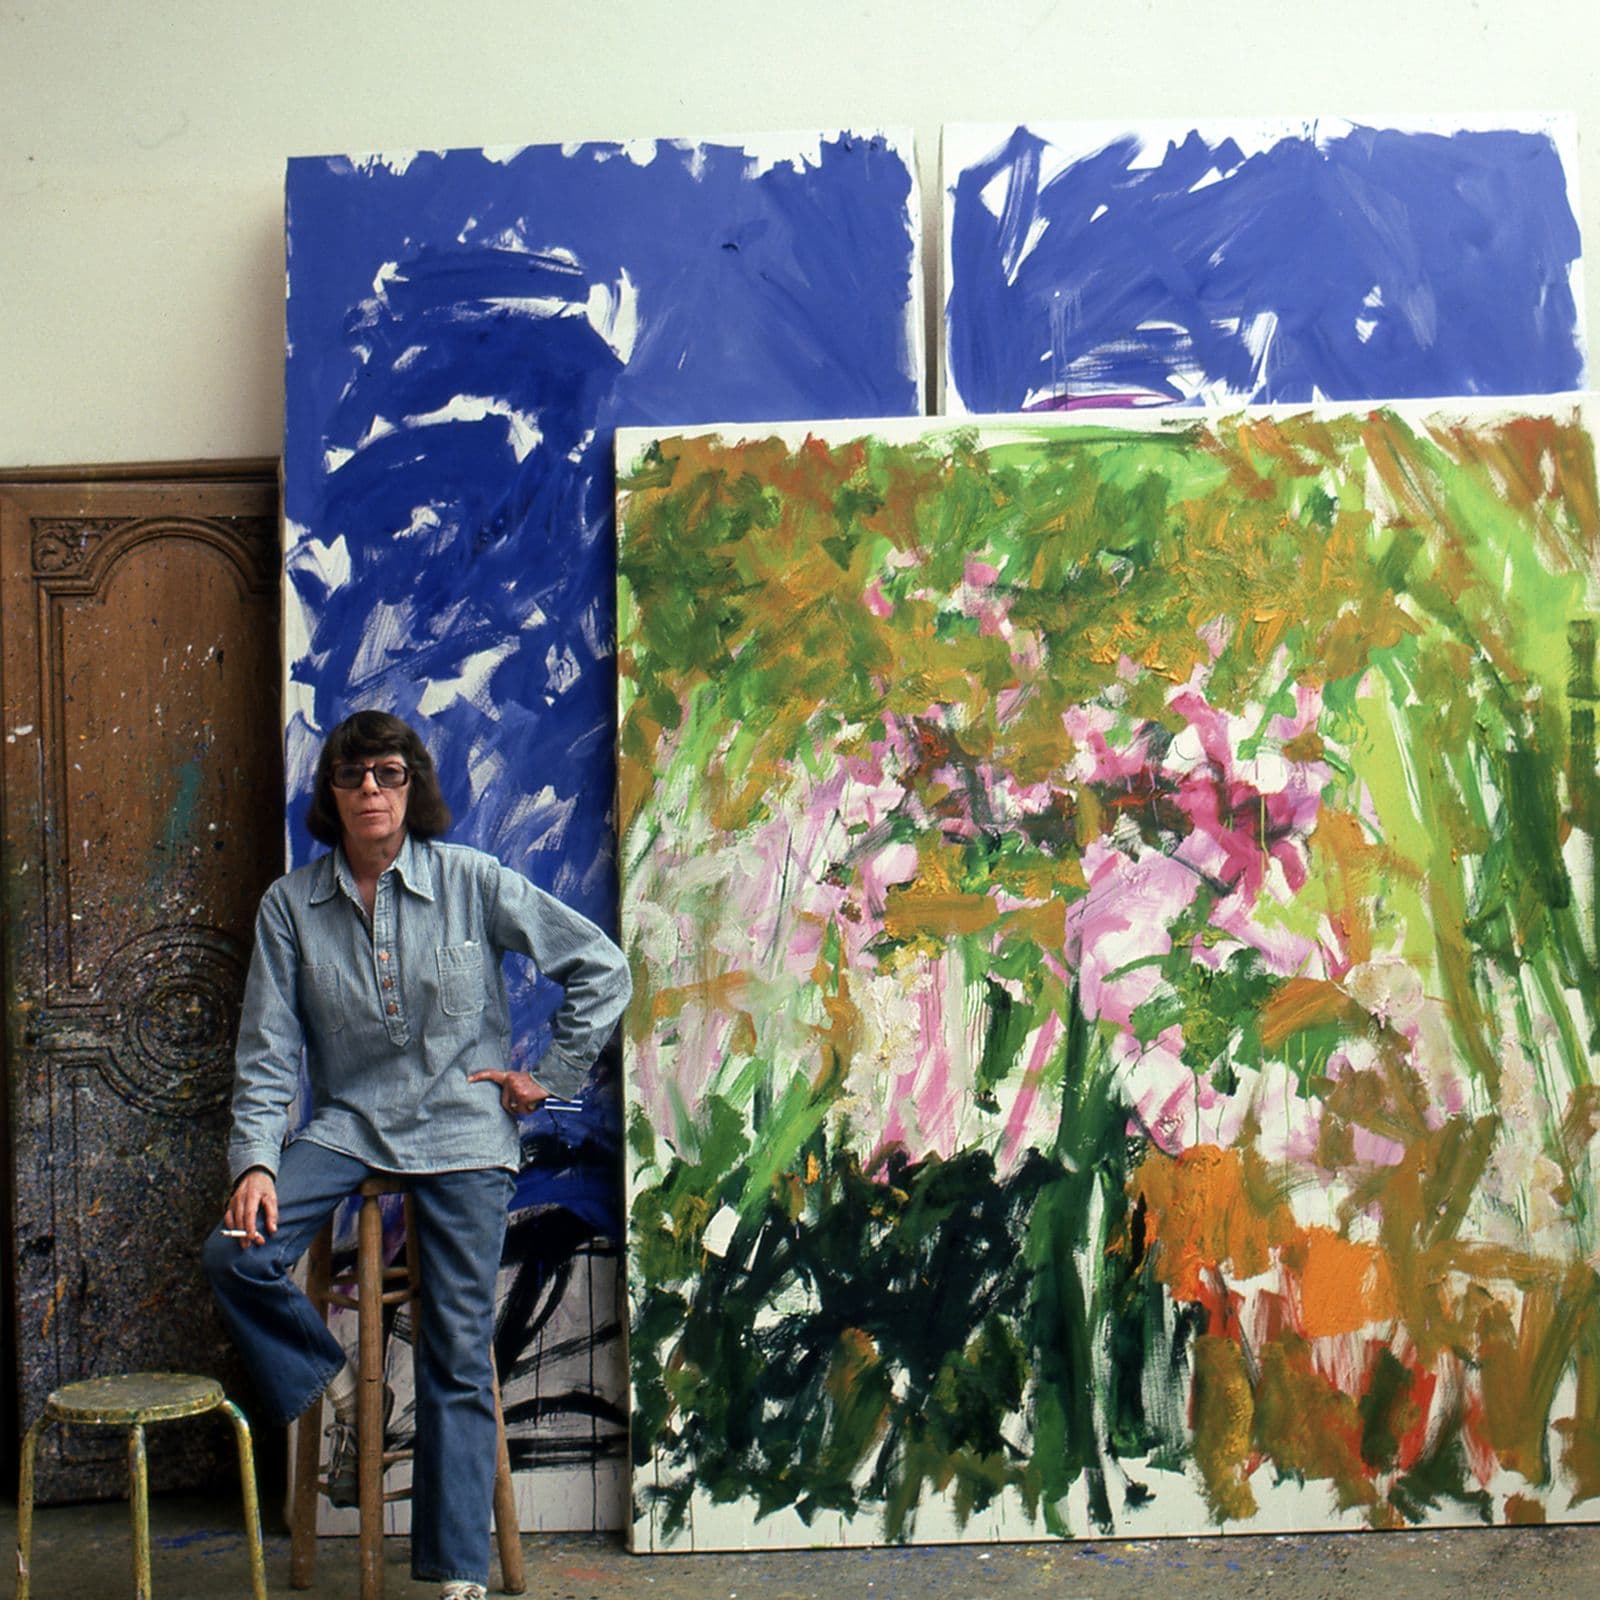 Joan Mitchell sits on a stool in front of two large painted canvasses